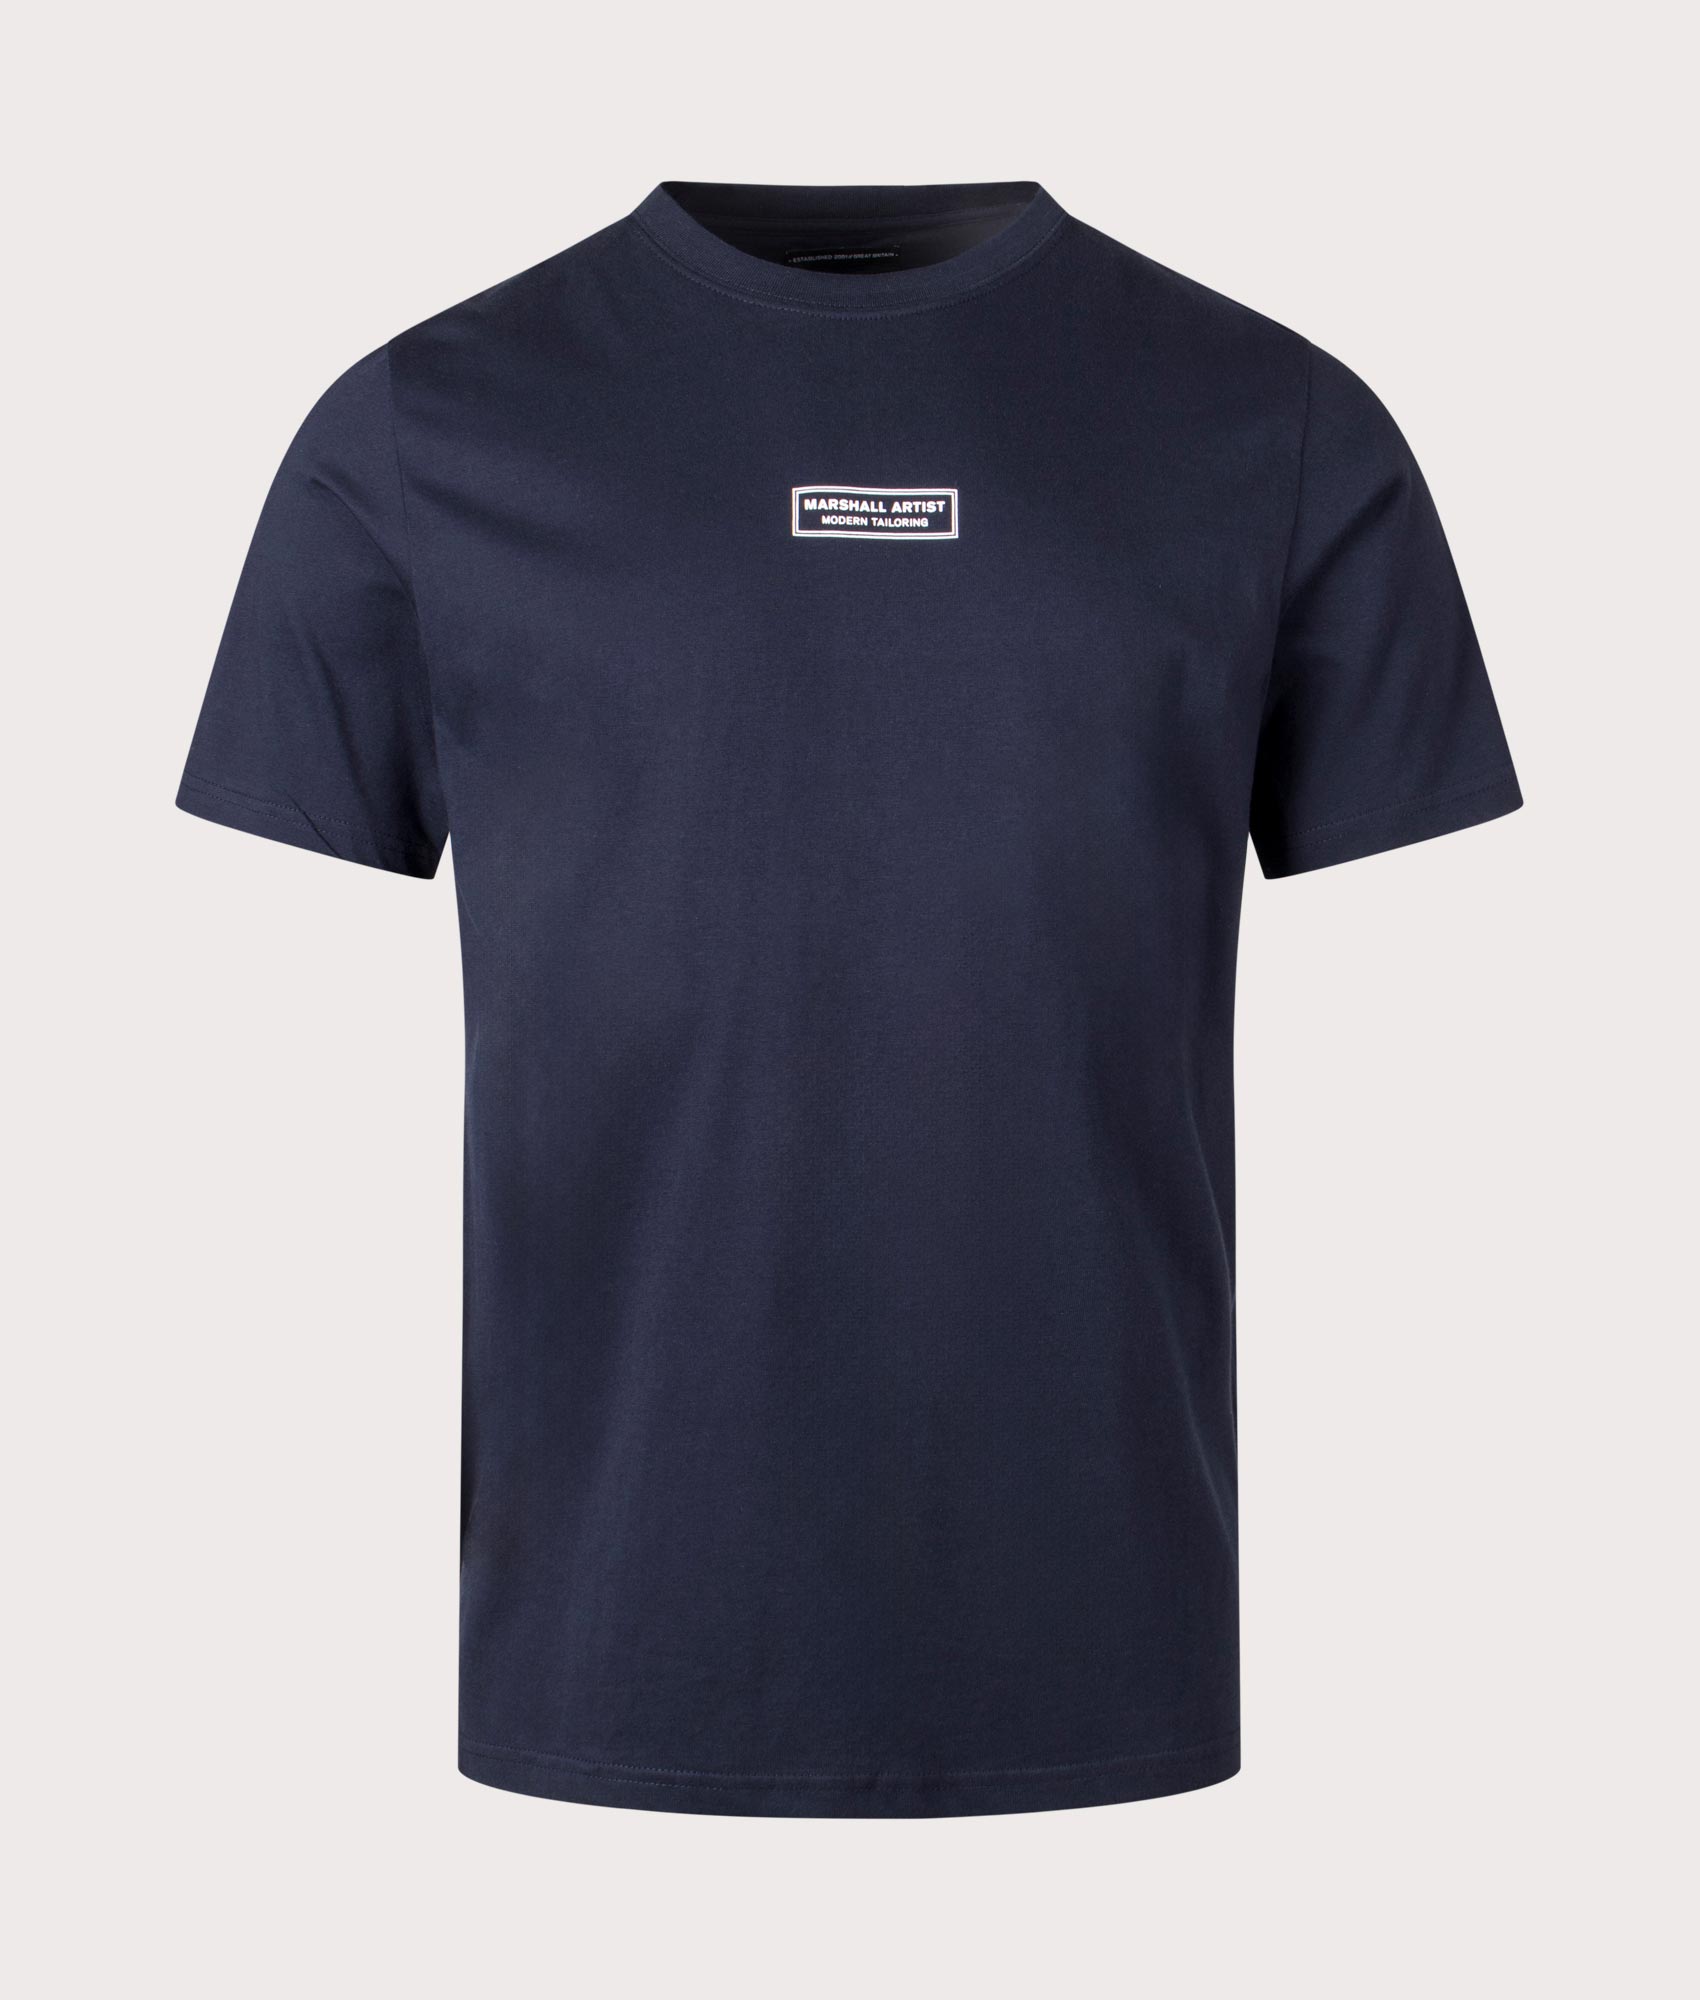 Marshall Artist Mens Injection T-Shirt - Colour: 003 Navy - Size: Small